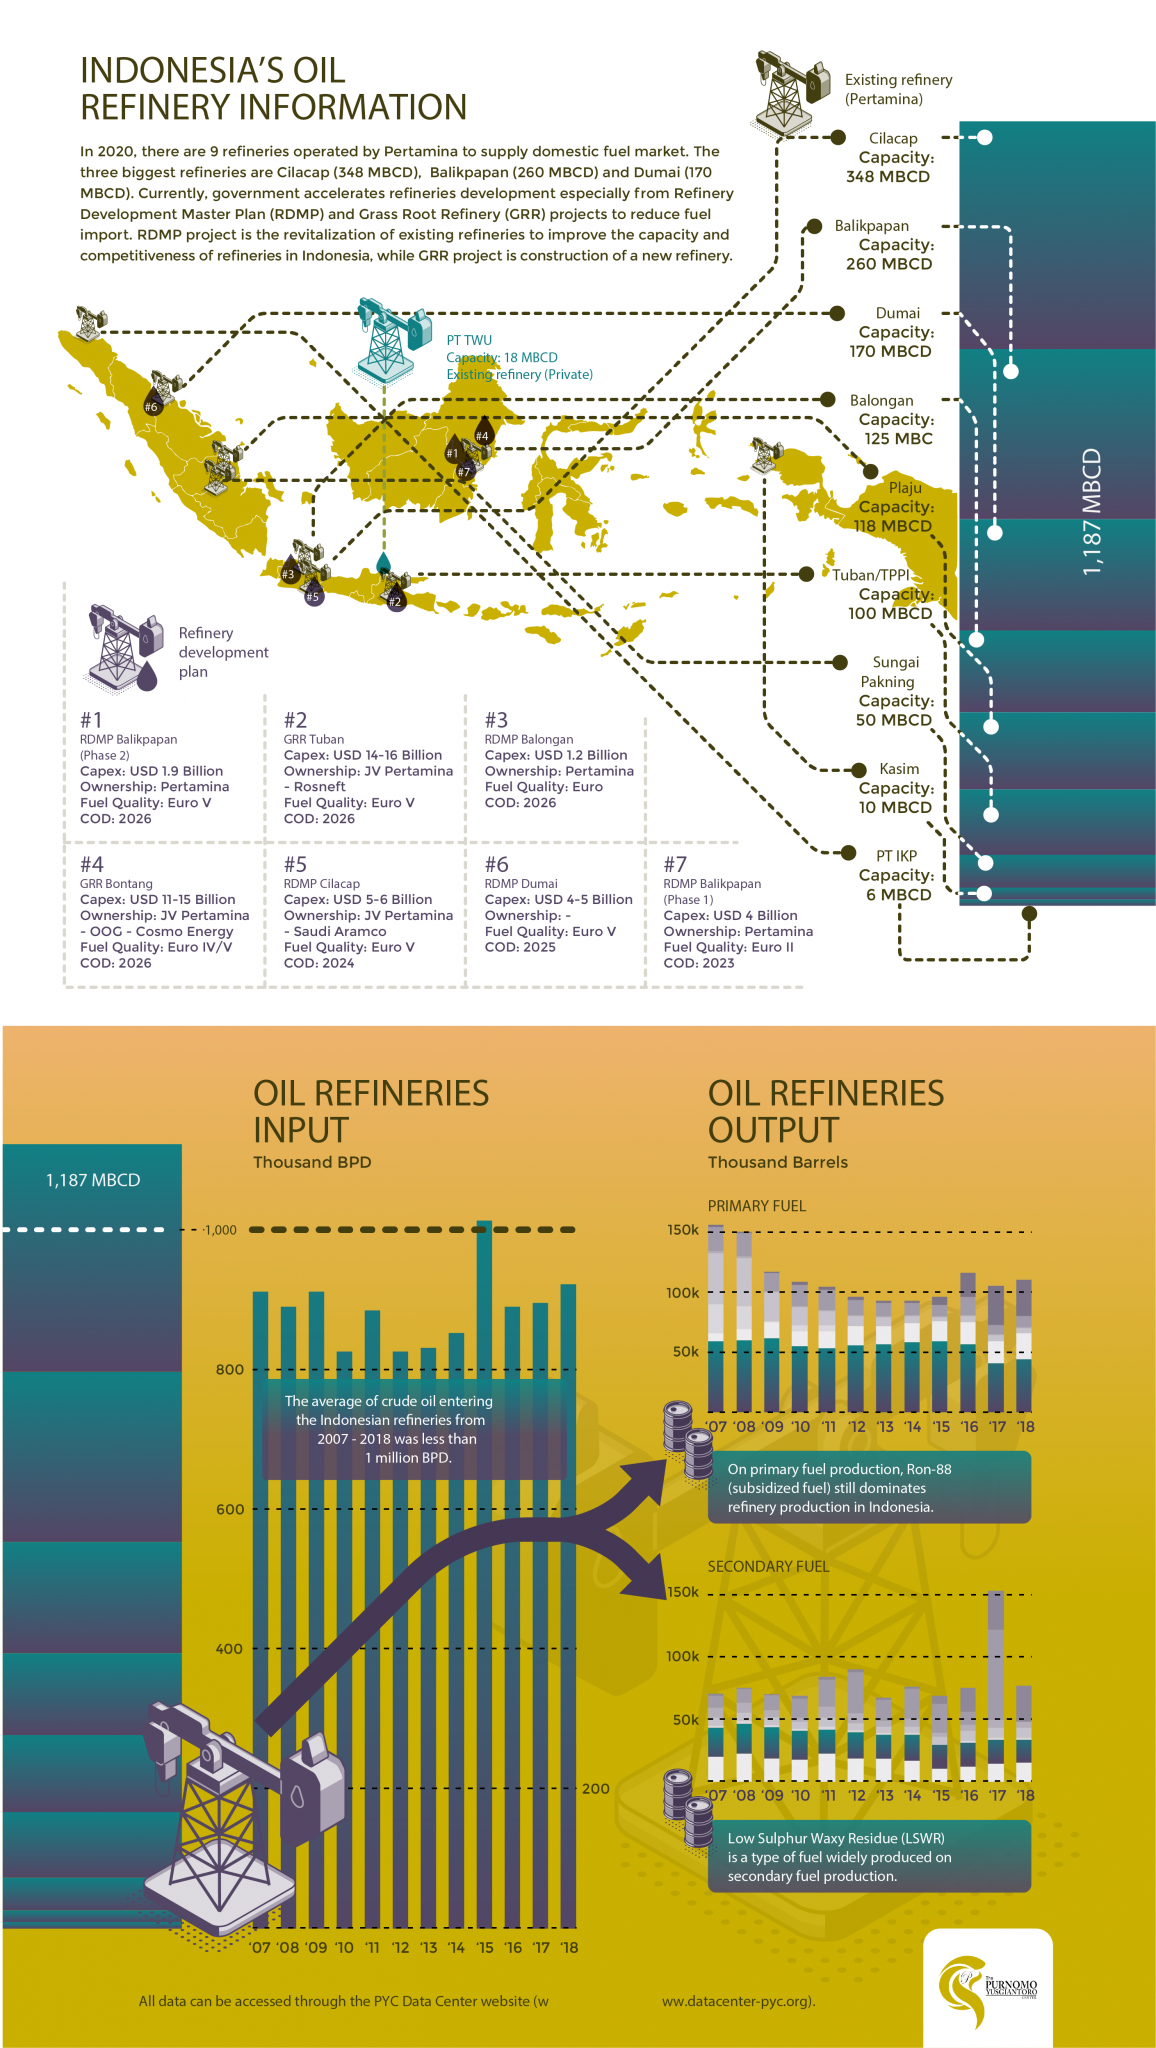 INDONESIA'S OIL REFINERY INFORMATION